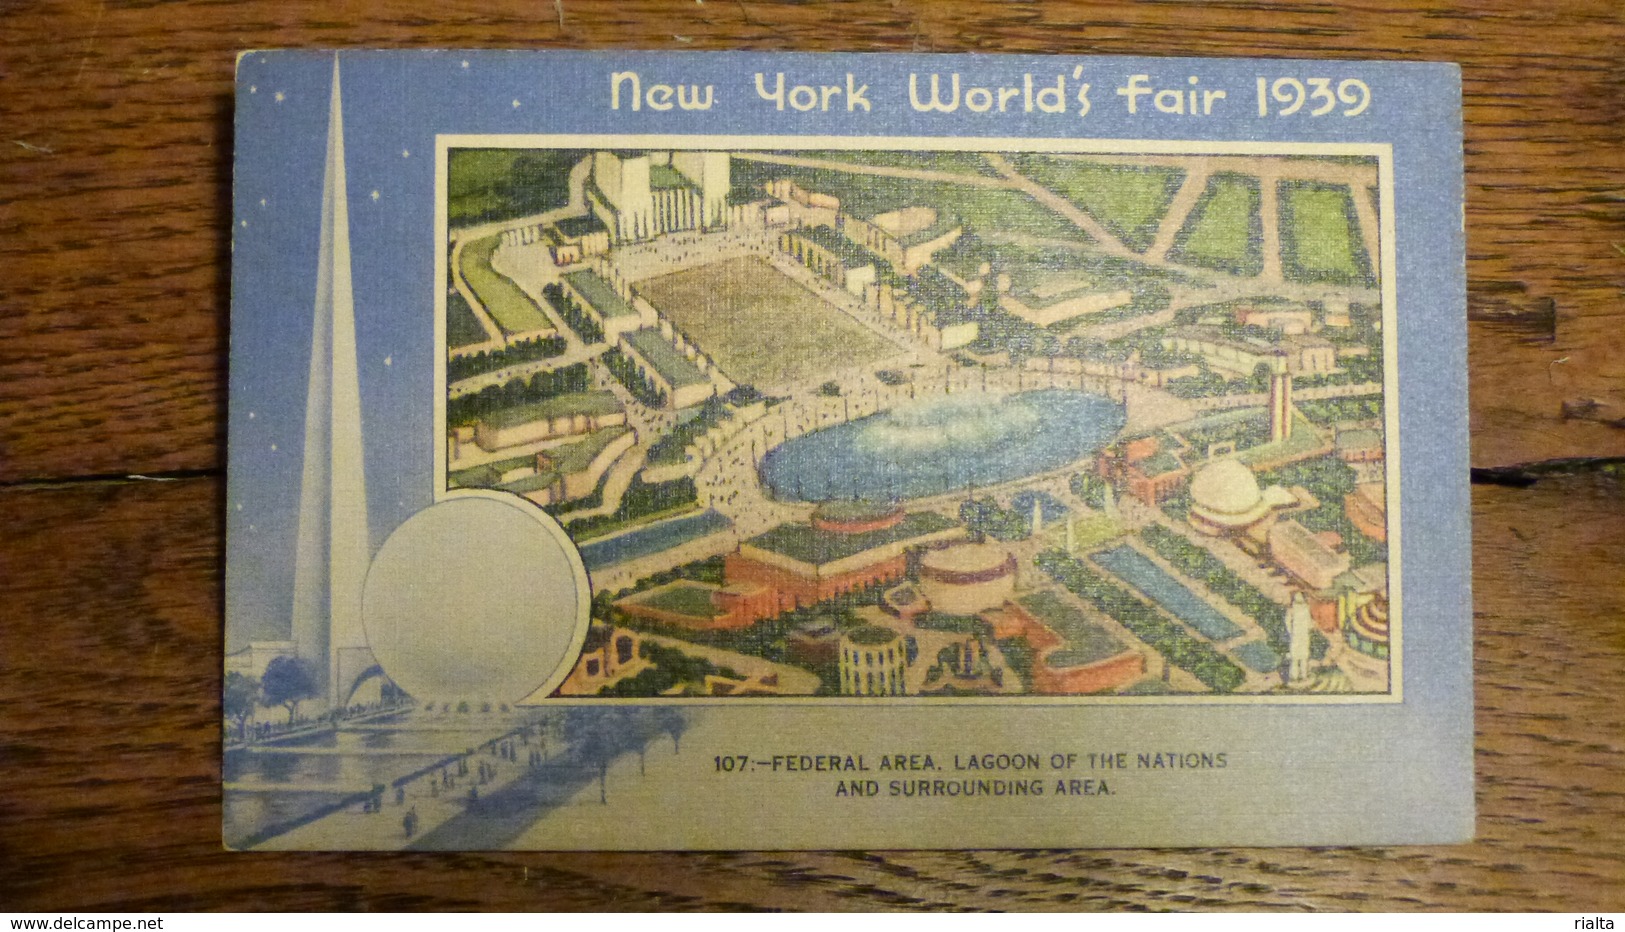 ETATS-UNIS, NEW YORK WORLD'S FAIR 1939, FEDERAL AREA, LAGOON OF THE NATIONS AND SURROUNDING AREA - Expositions